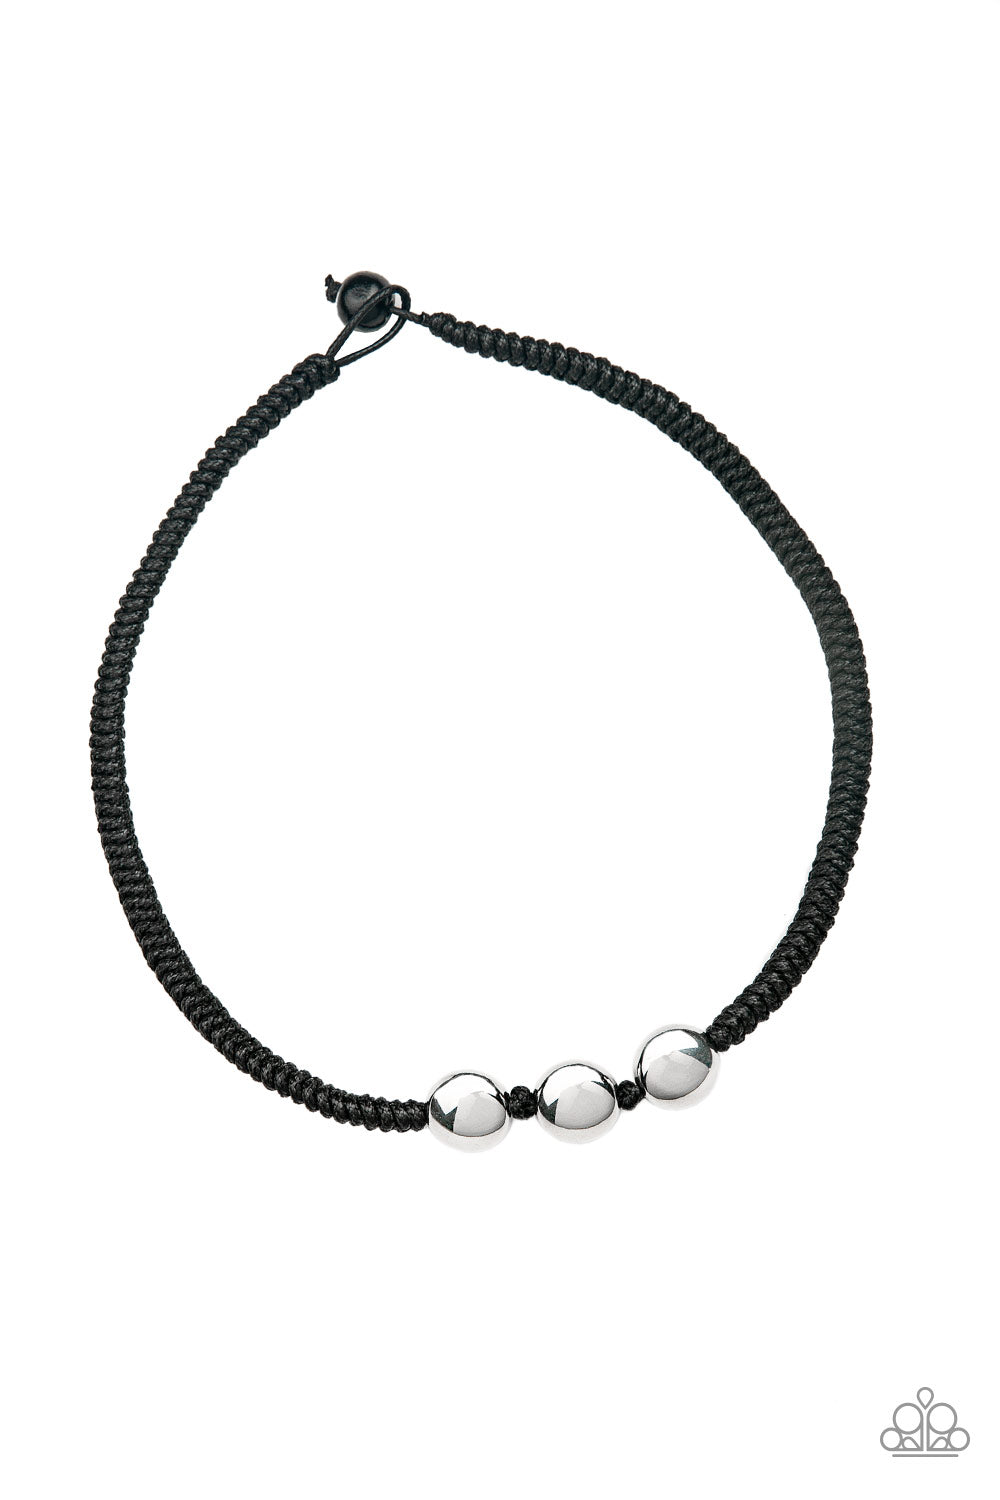 Paparazzi Pedal To The Metal - Black Urban Necklace